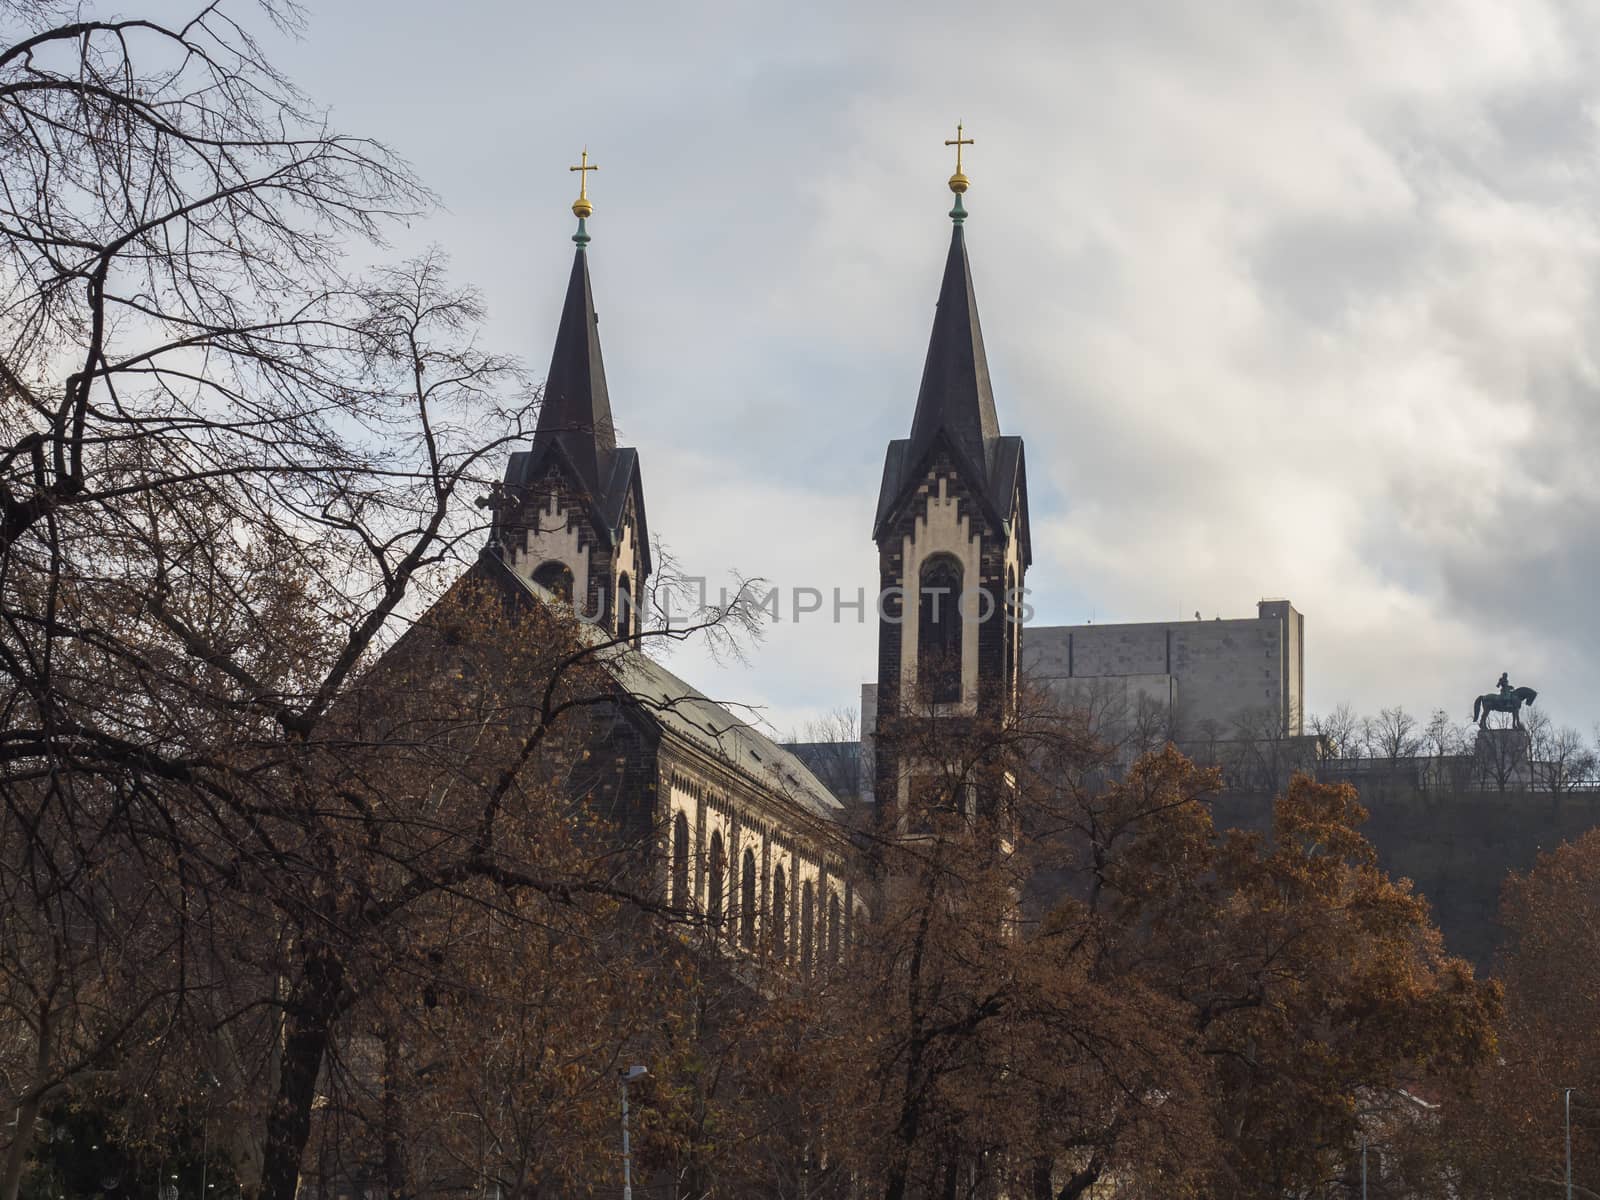 Saints Cyril and Methodius gothic church and National Monument at Vitkov with Equestrian Statue of Jan Zizka viewed from Karlinske namesti square park with late autumn trees. Czech Republic, Prague.